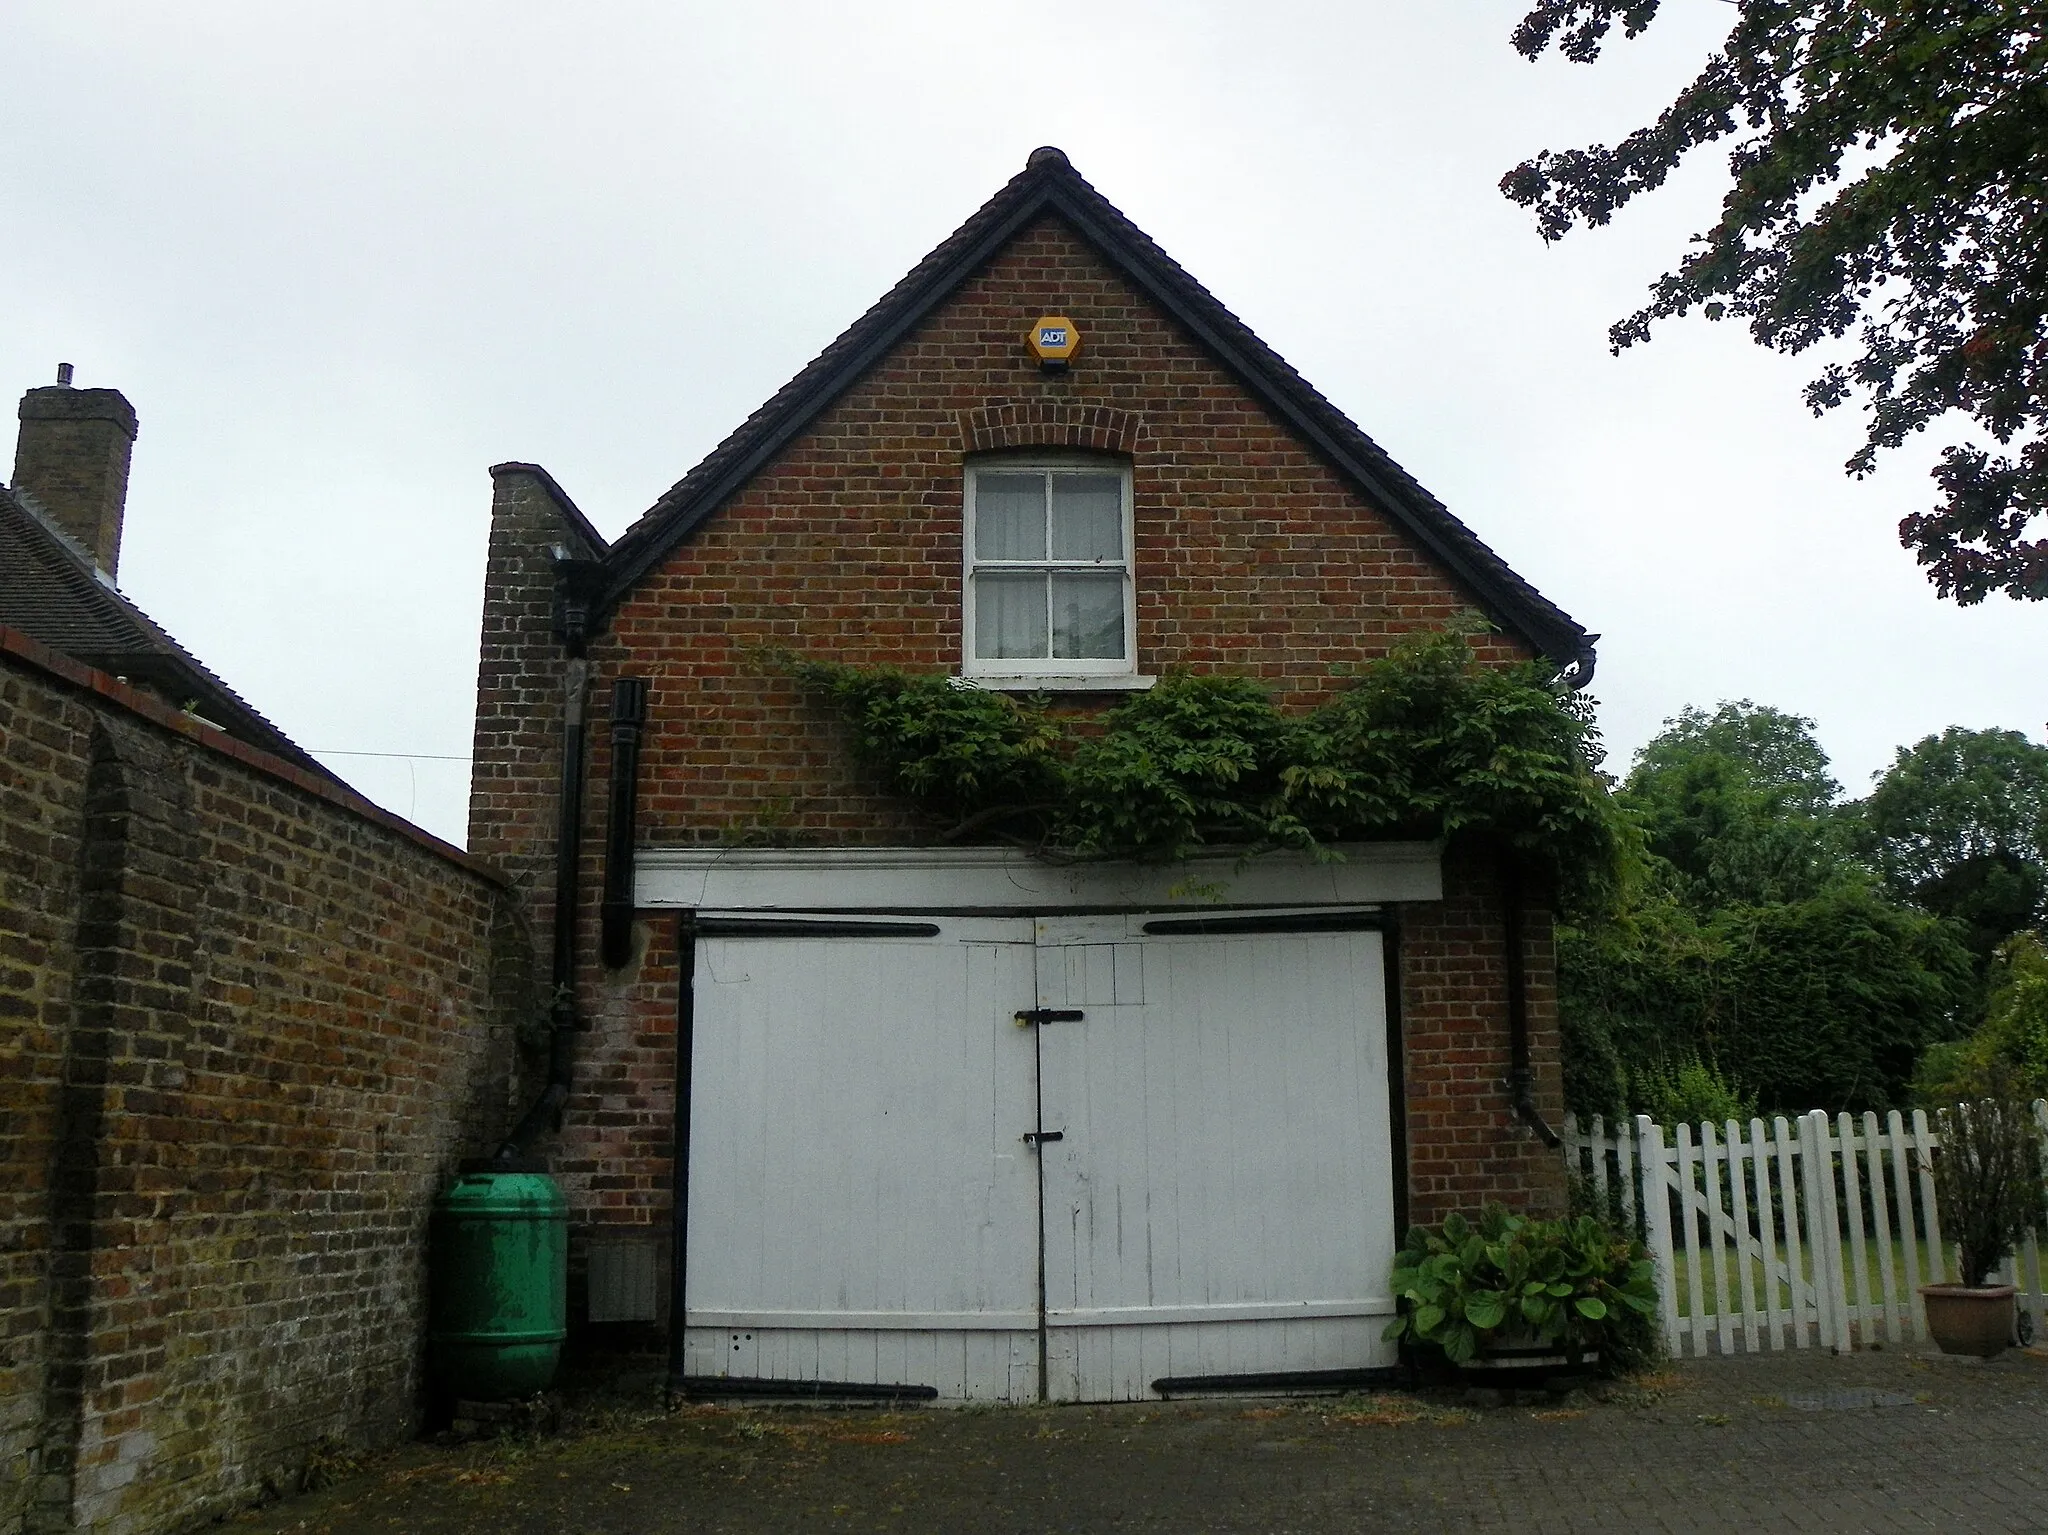 Photo showing: The Old Stables, Harefield, Hillingdon, Greater London (not listed).

GOC Hertfordshire's walk on 13 June 2015, in and around Rickmansworth and Batchworth Heath in Hertfordshire and Harefield in the London Borough of Hillingdon. Maritn T led this walk of 9.6 miles, with 14 attendees. The purpose of the walk was to have a view of the small part of Hertfordshire countryside that will be affected by the construction of HS2. Please check out the other photos from the walk here, or to see my collections, go here. For more information on the Gay Outdoor Club, see www.goc.org.uk.